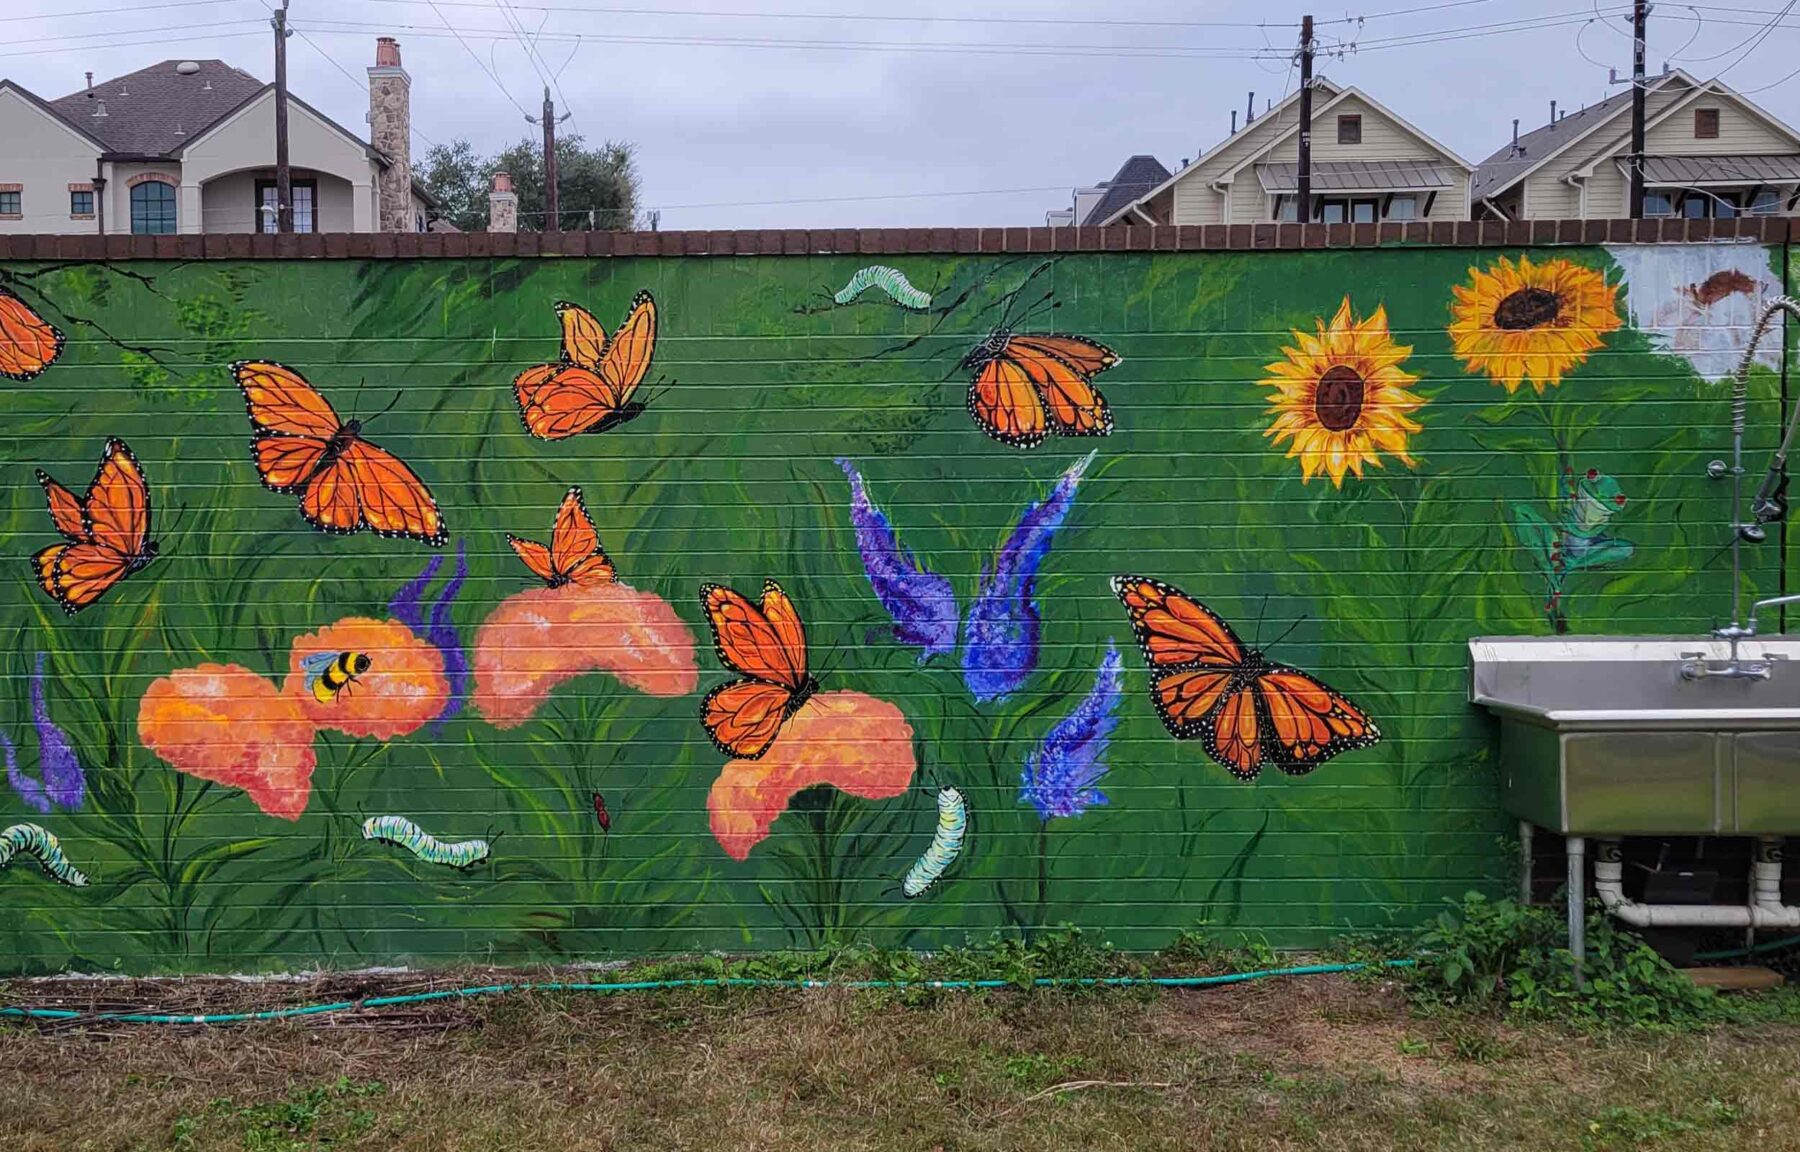 Baker Mural showing orange butterflies and flowers on a green background.